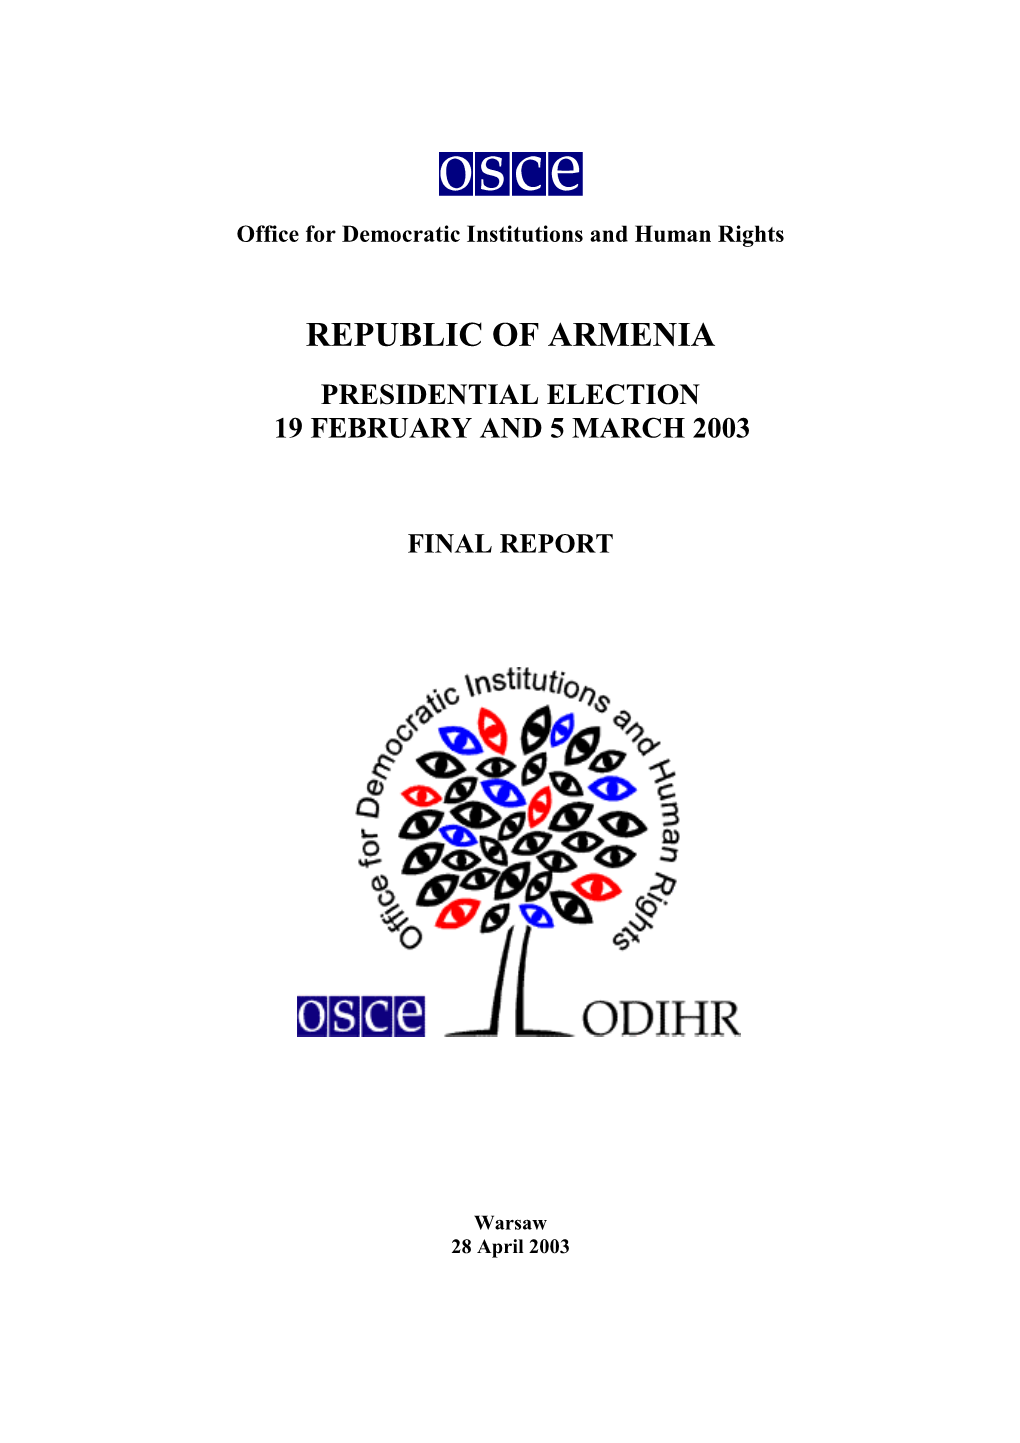 Republic of Armenia Presidential Election 19 February and 5 March 2003